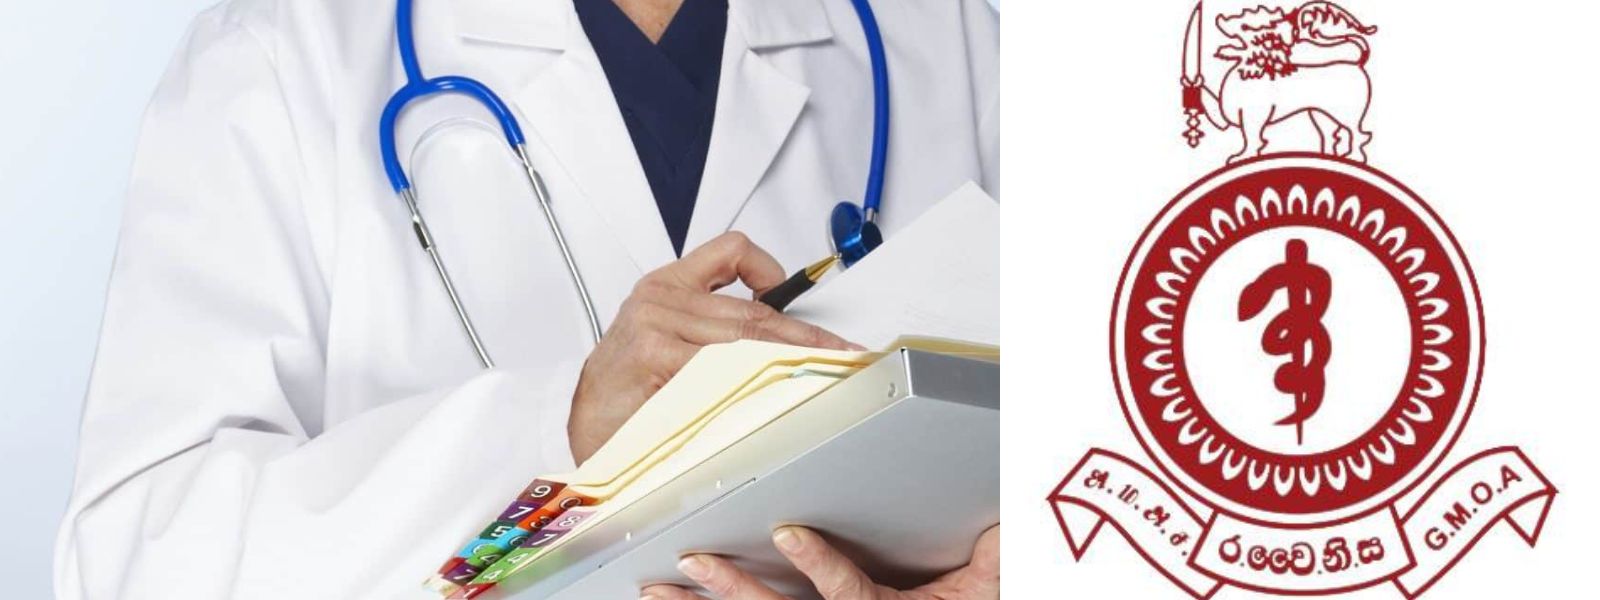 Doctors to stage silent protest across hospitals in Sri Lanka – GMOA